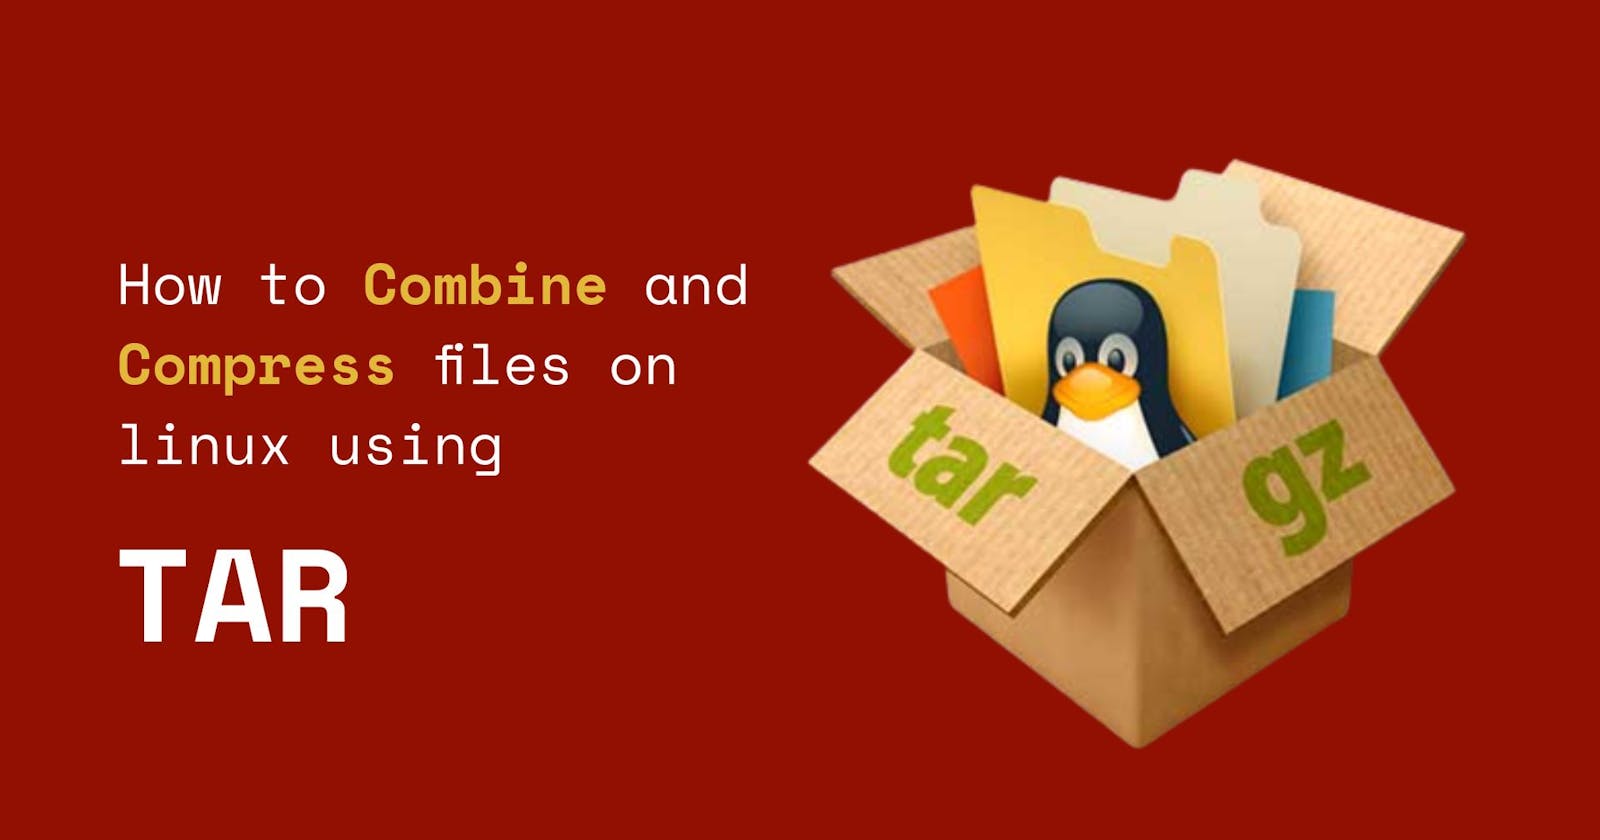 How to Combine and Compress files on Linux using the TAR command